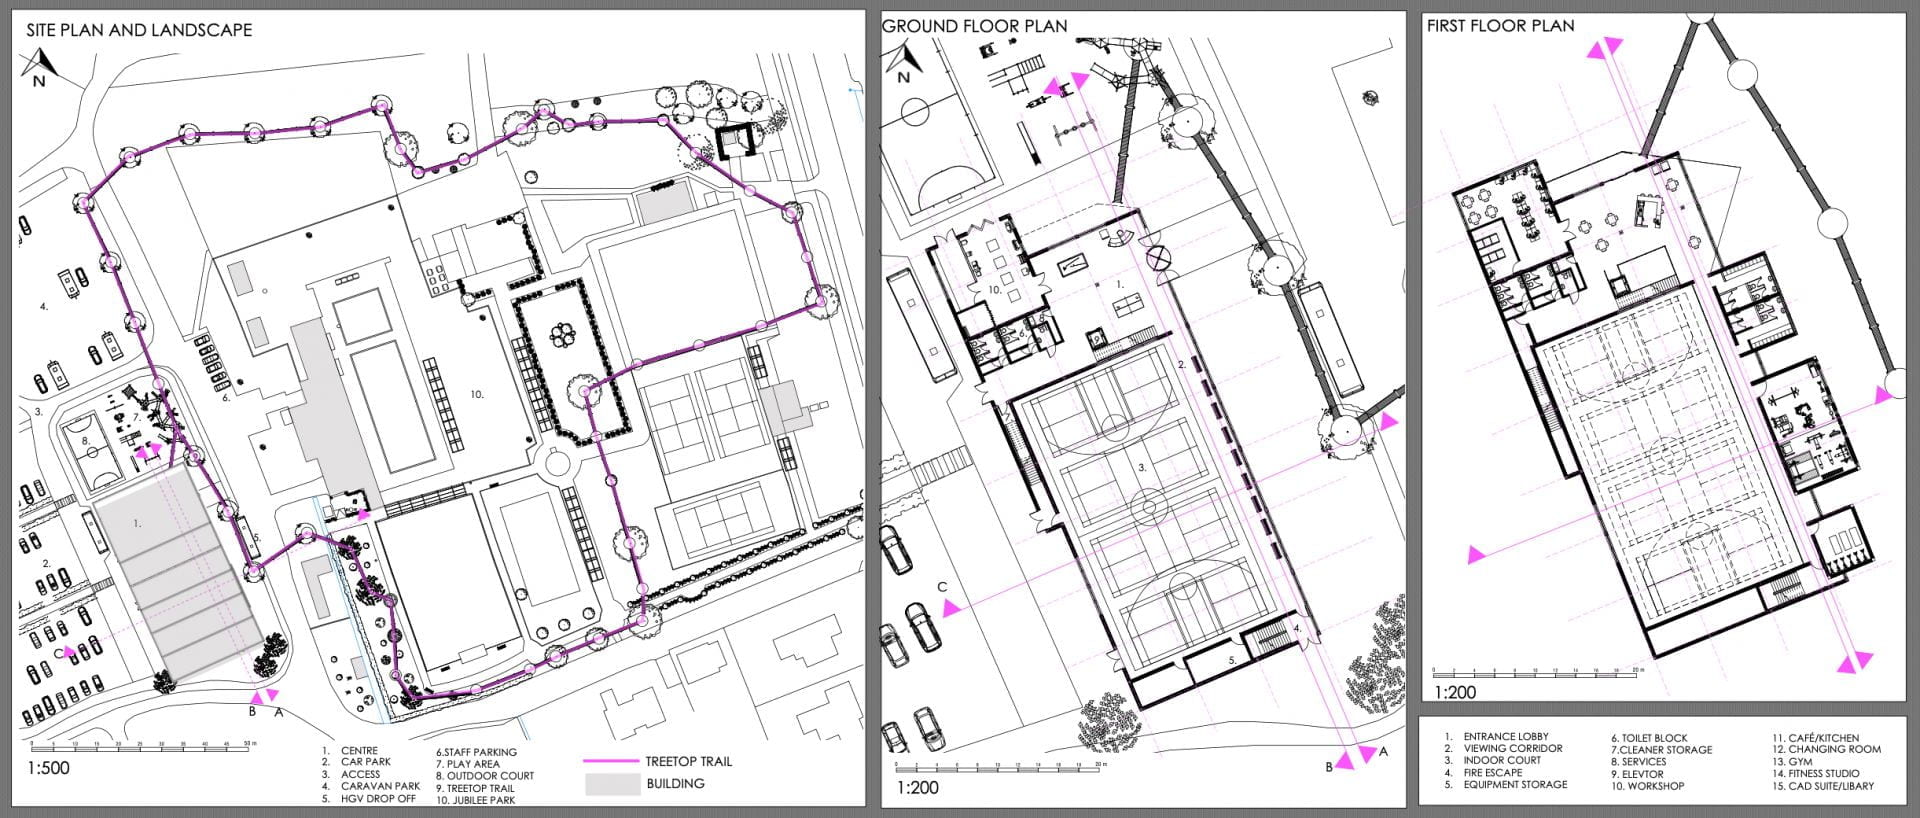 Site plan showing where the building will sit within its context